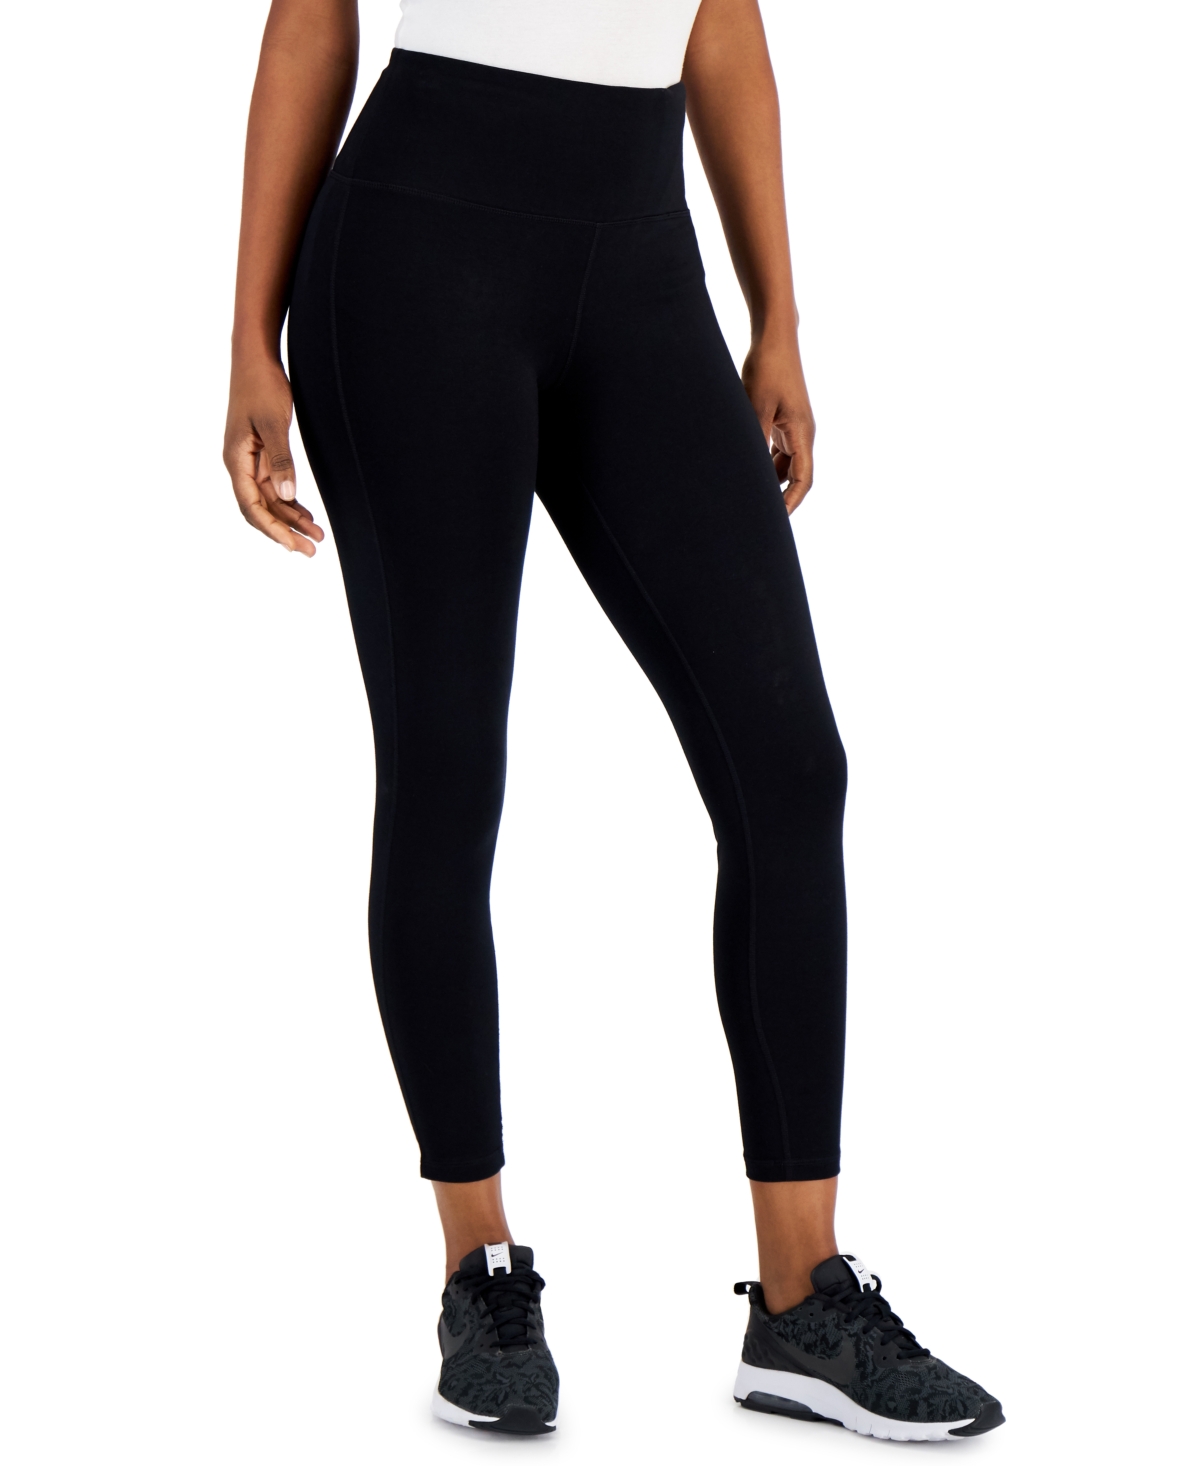 ID IDEOLOGY PETITE SOLID 7/8 LEGGING, CREATED FOR MACY'S